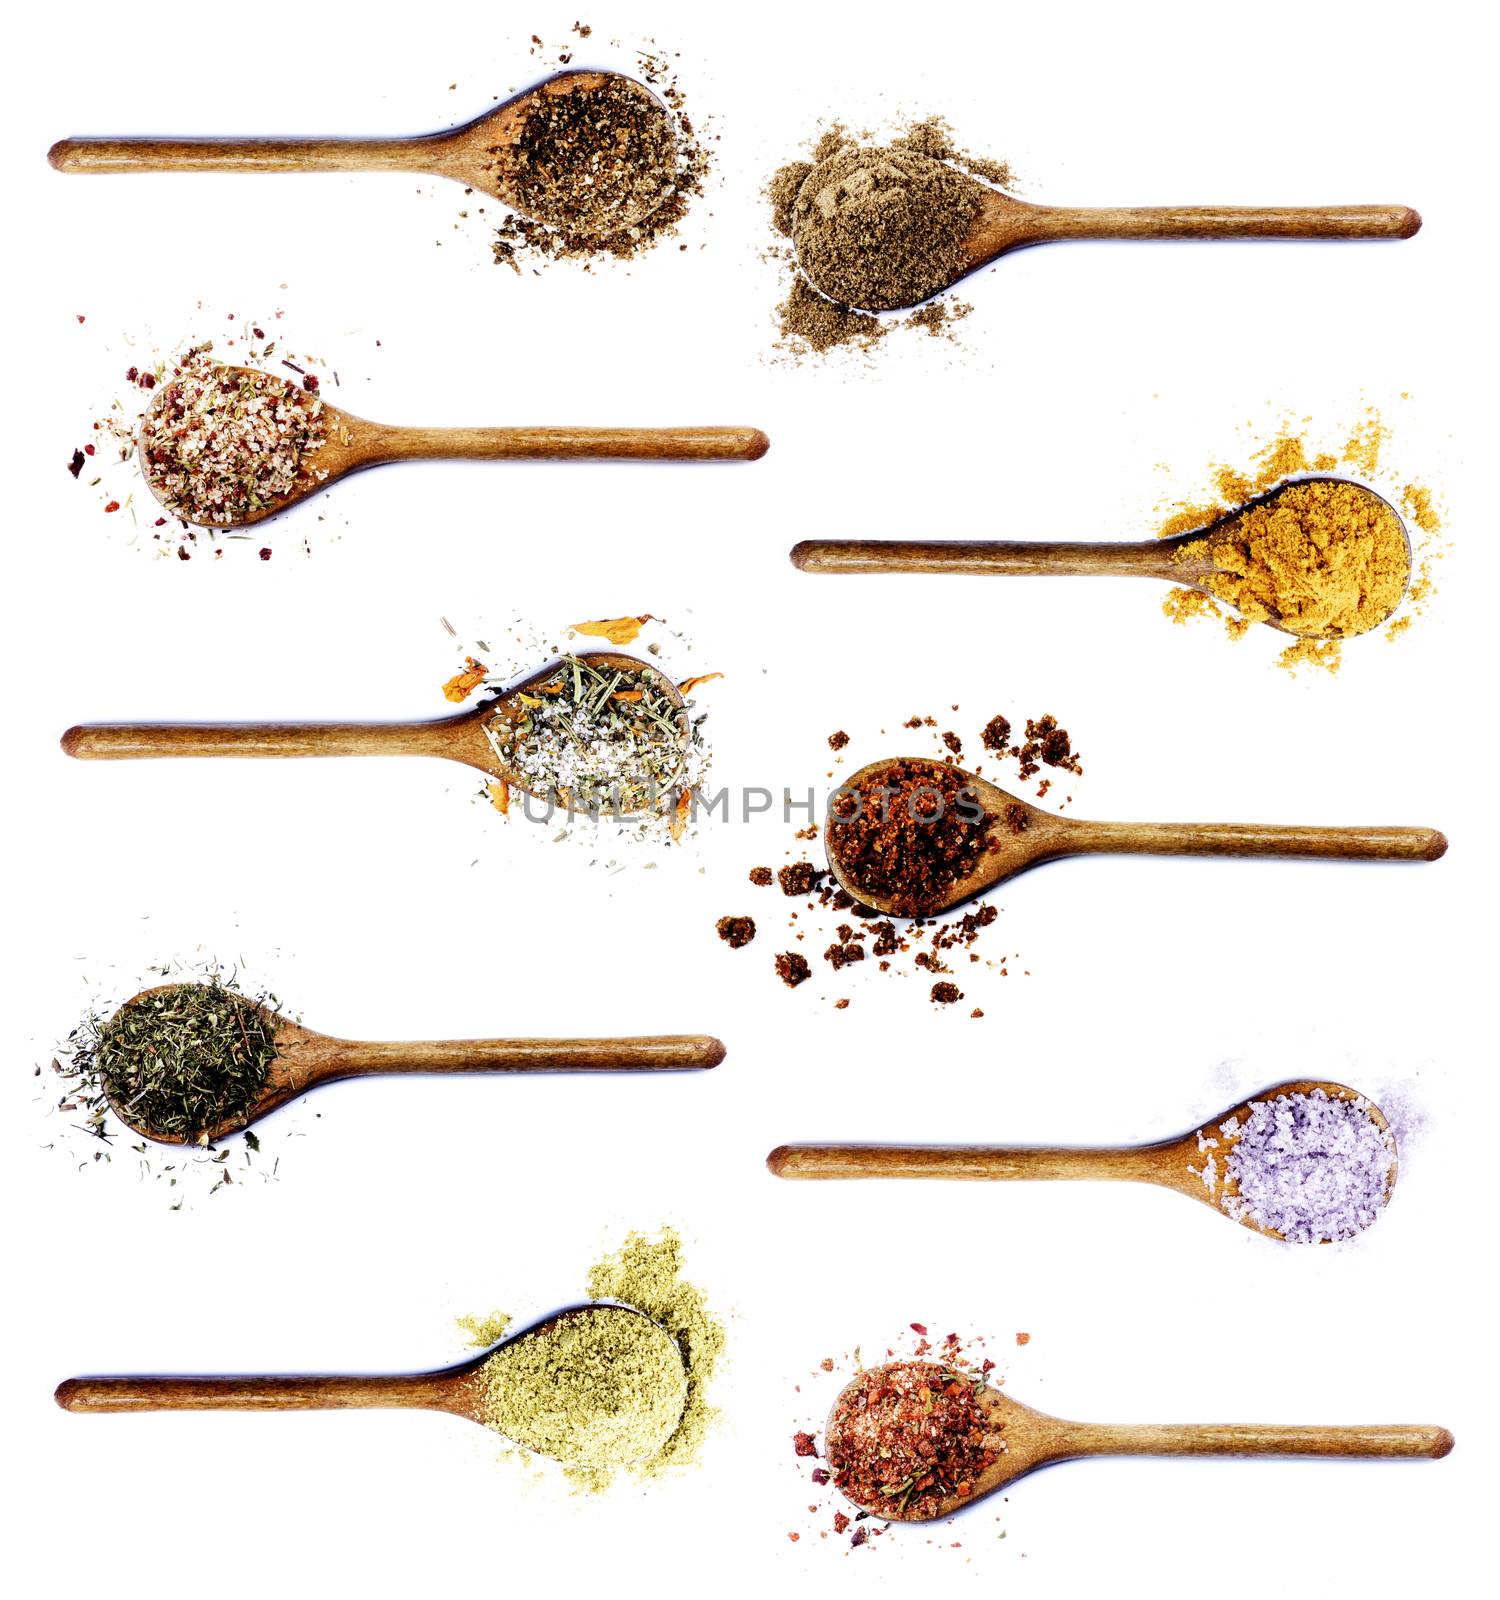 Collection of Various Spices in Wooden Spoons: Coriander,  Dried Paprika, Salt with Chili and Petals, Thyme, Cumin and Curry Powders, Dried Chili and Kosher Salt isolated on White background